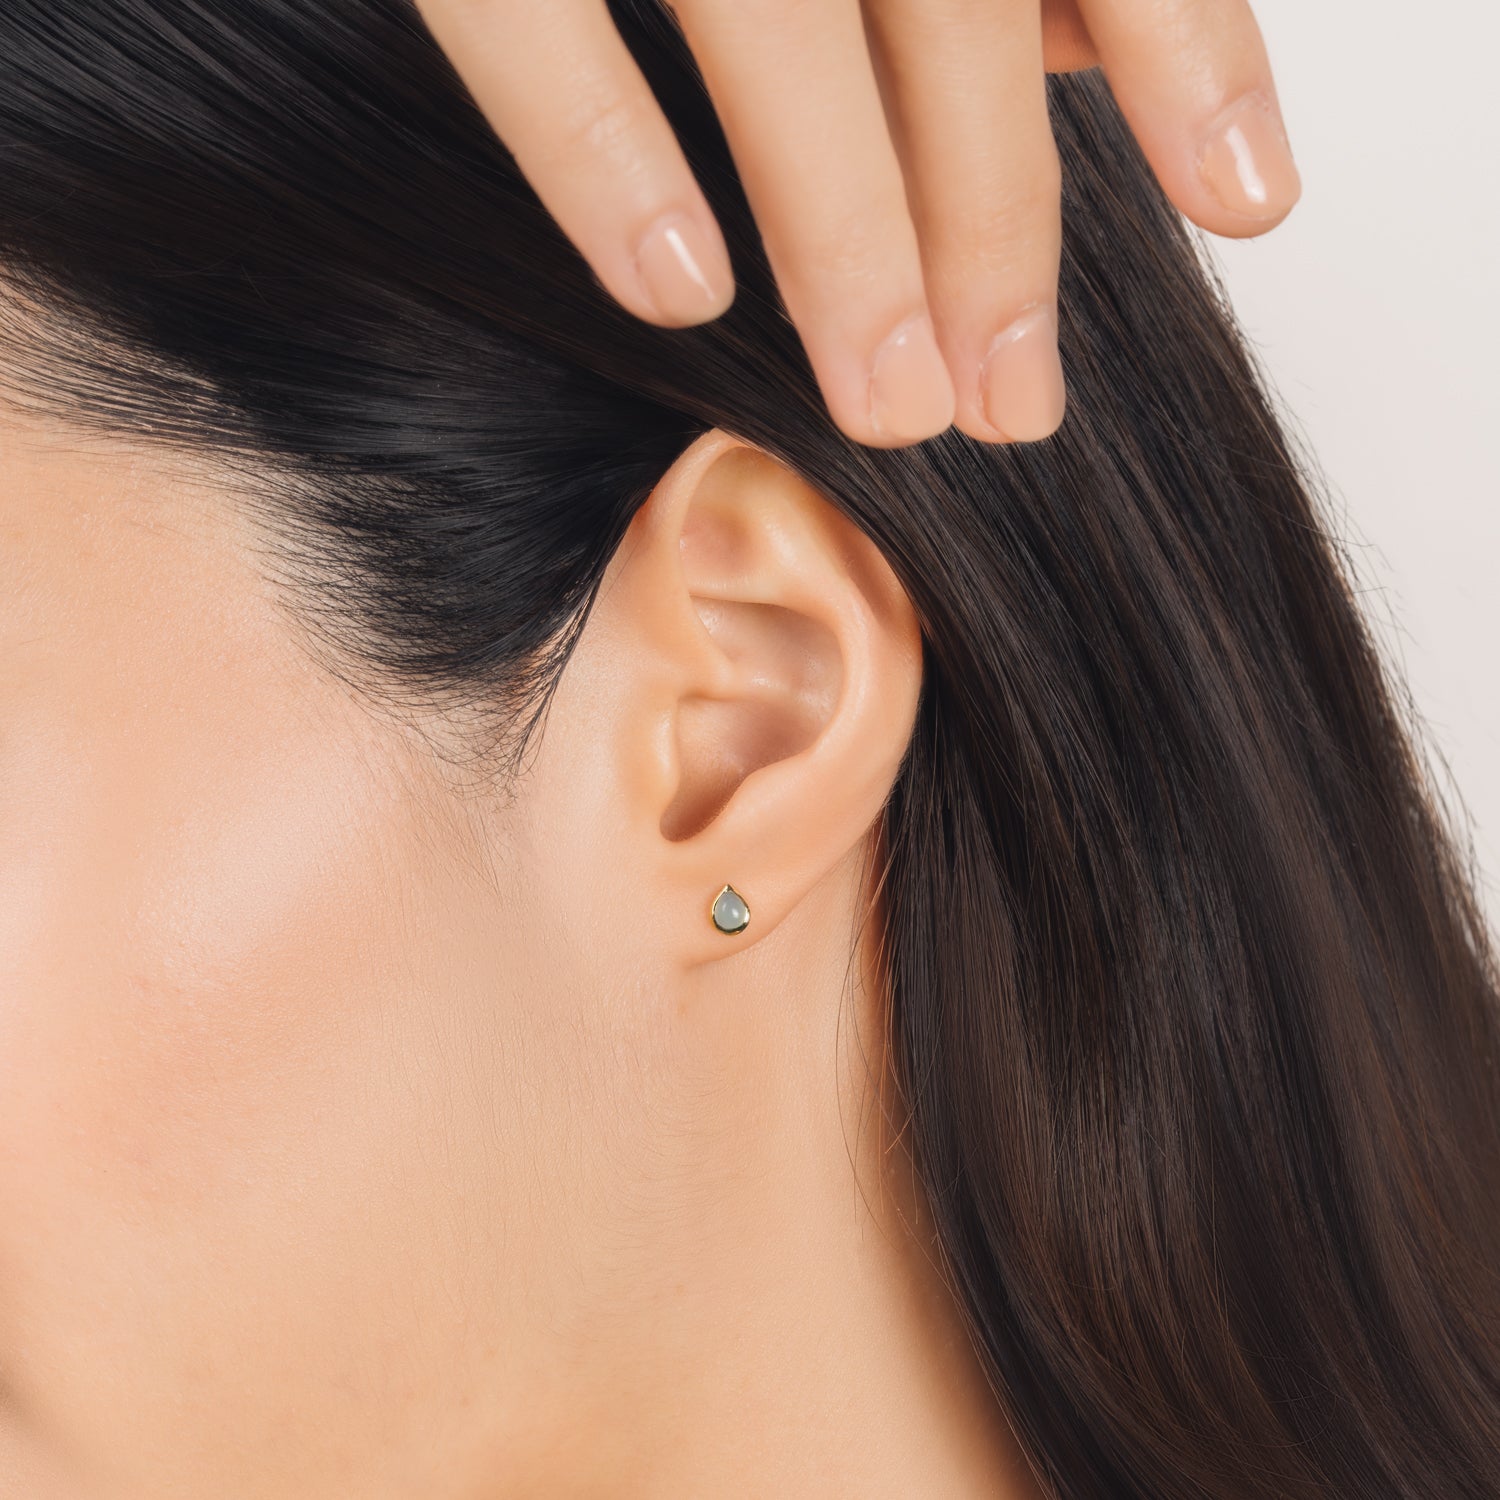 Fine and dainty studs. Model is wearing solid yellow gold earrings set with chalcedony gemstones